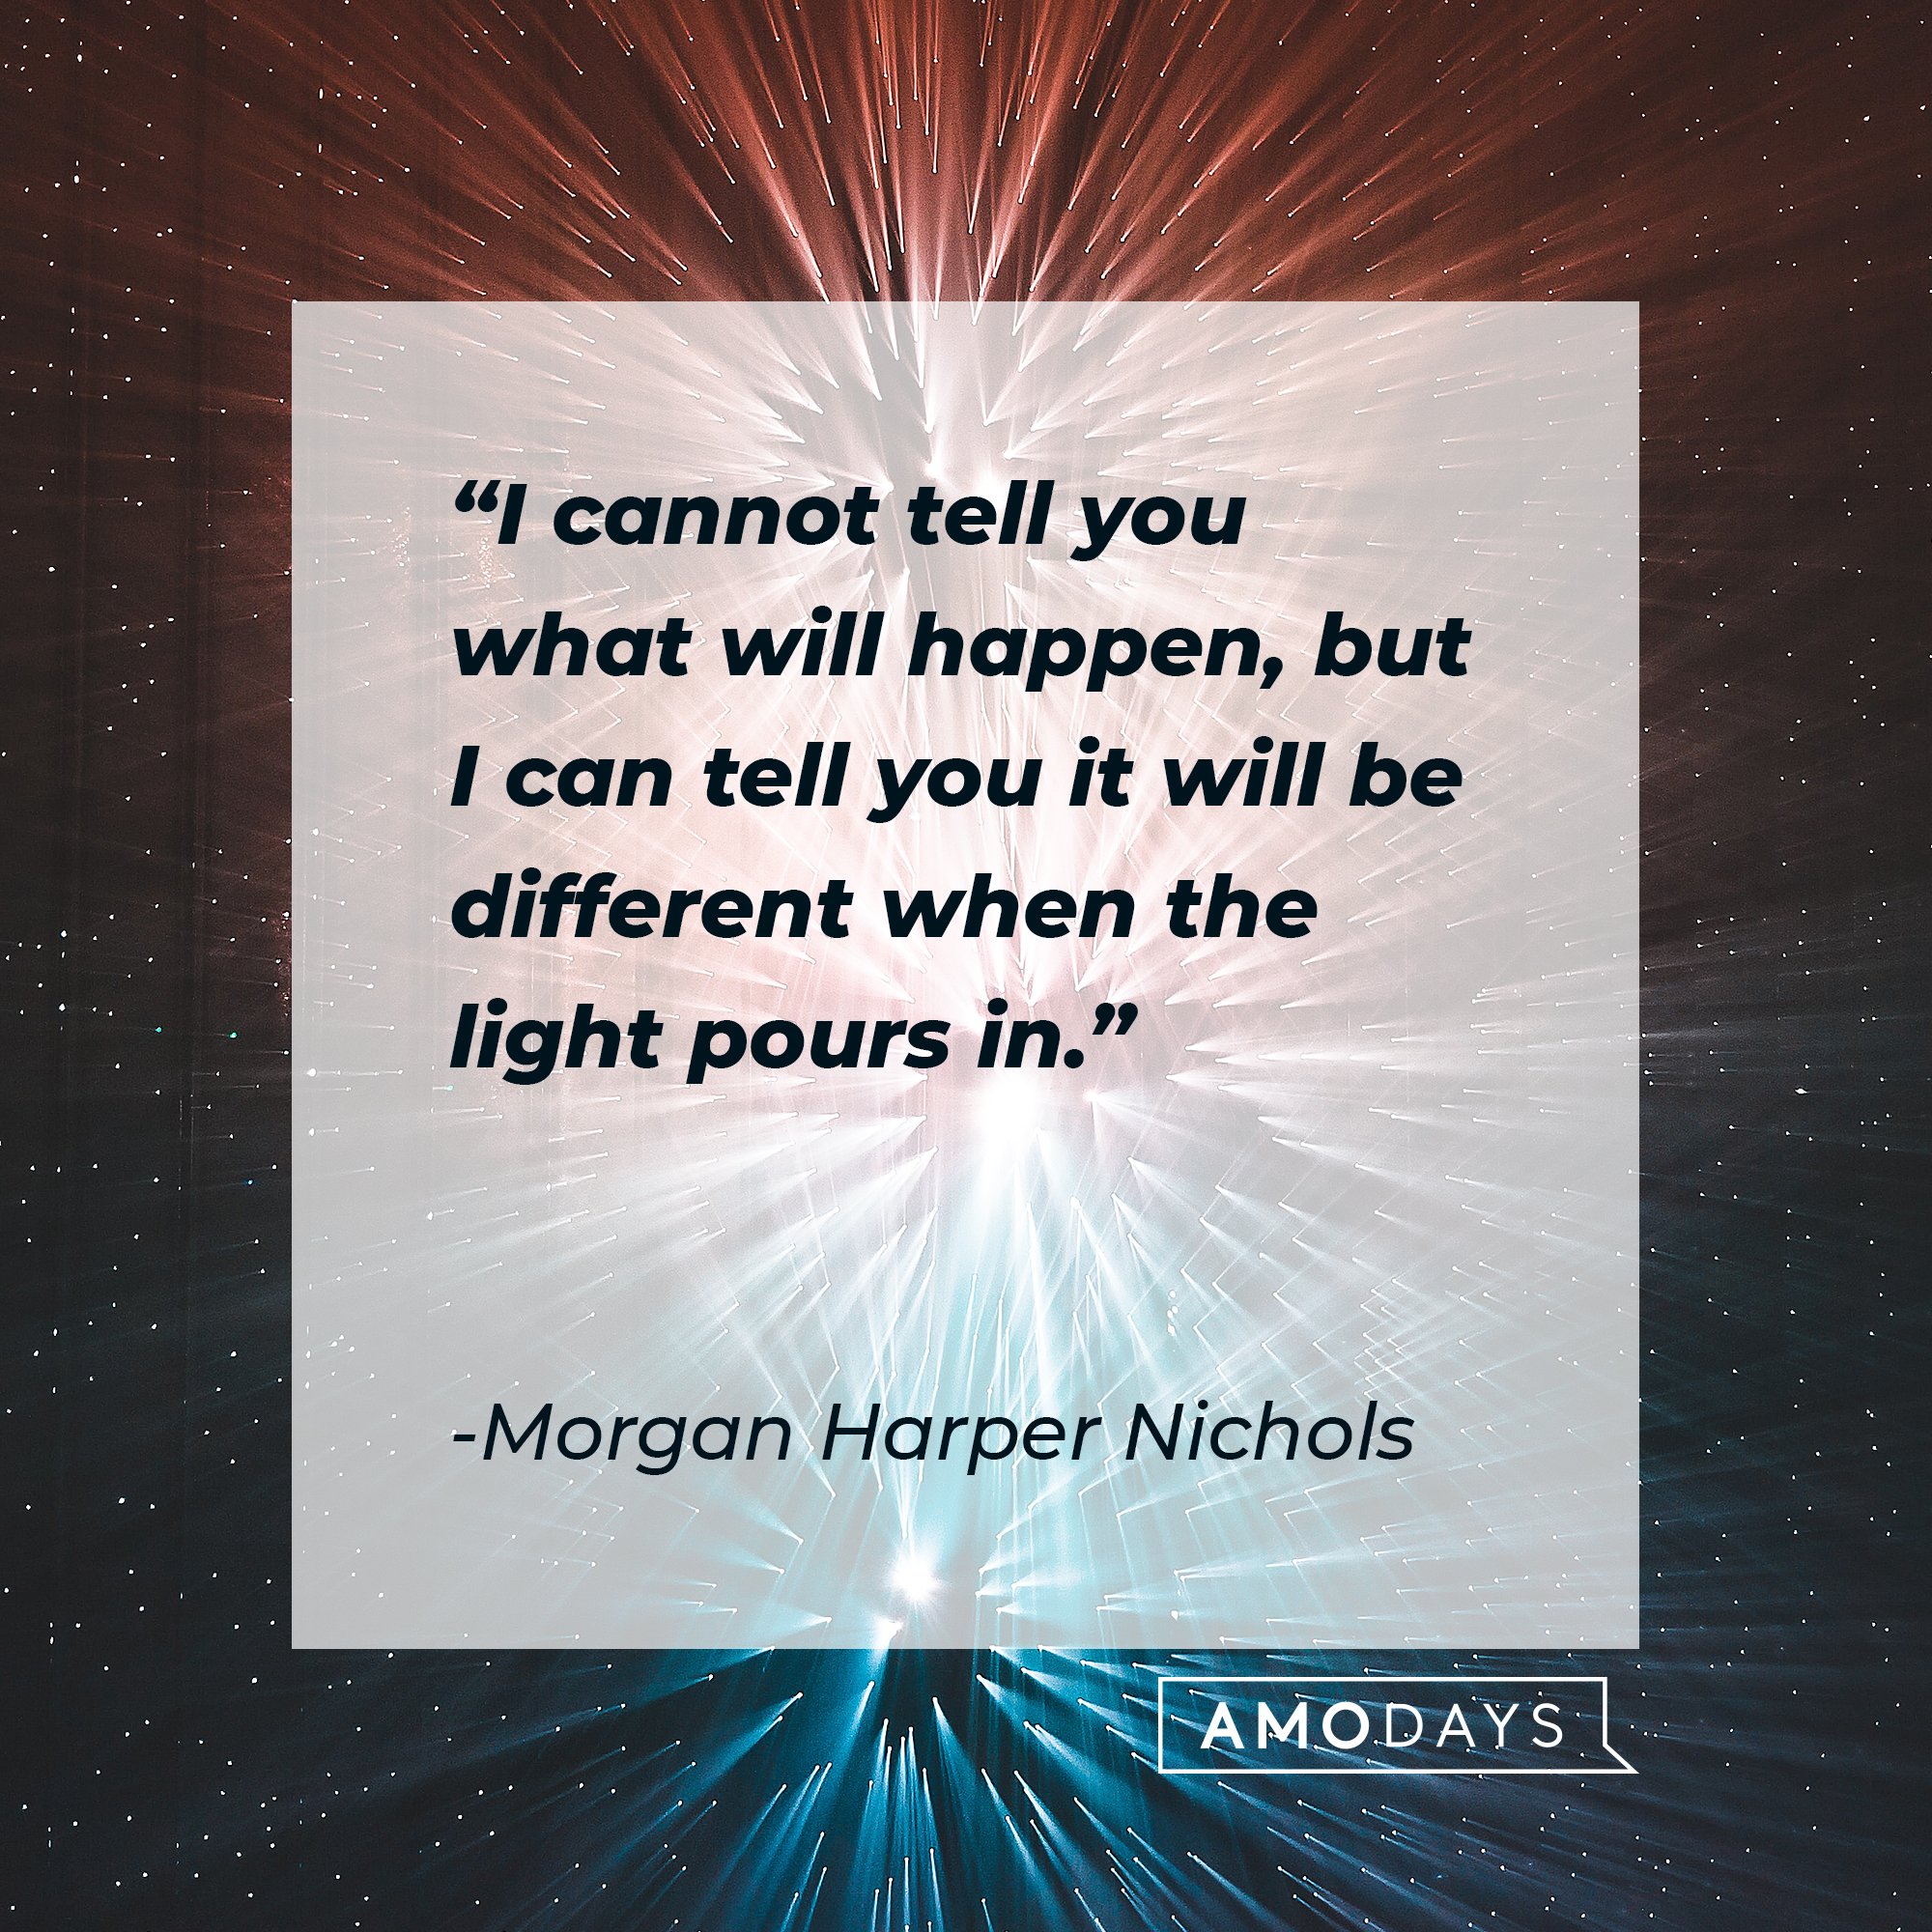 Morgan Harper Nichols’ quote: "I cannot tell you what will happen, but I can tell you it will be different when the light pours in." | Image: AmoDays